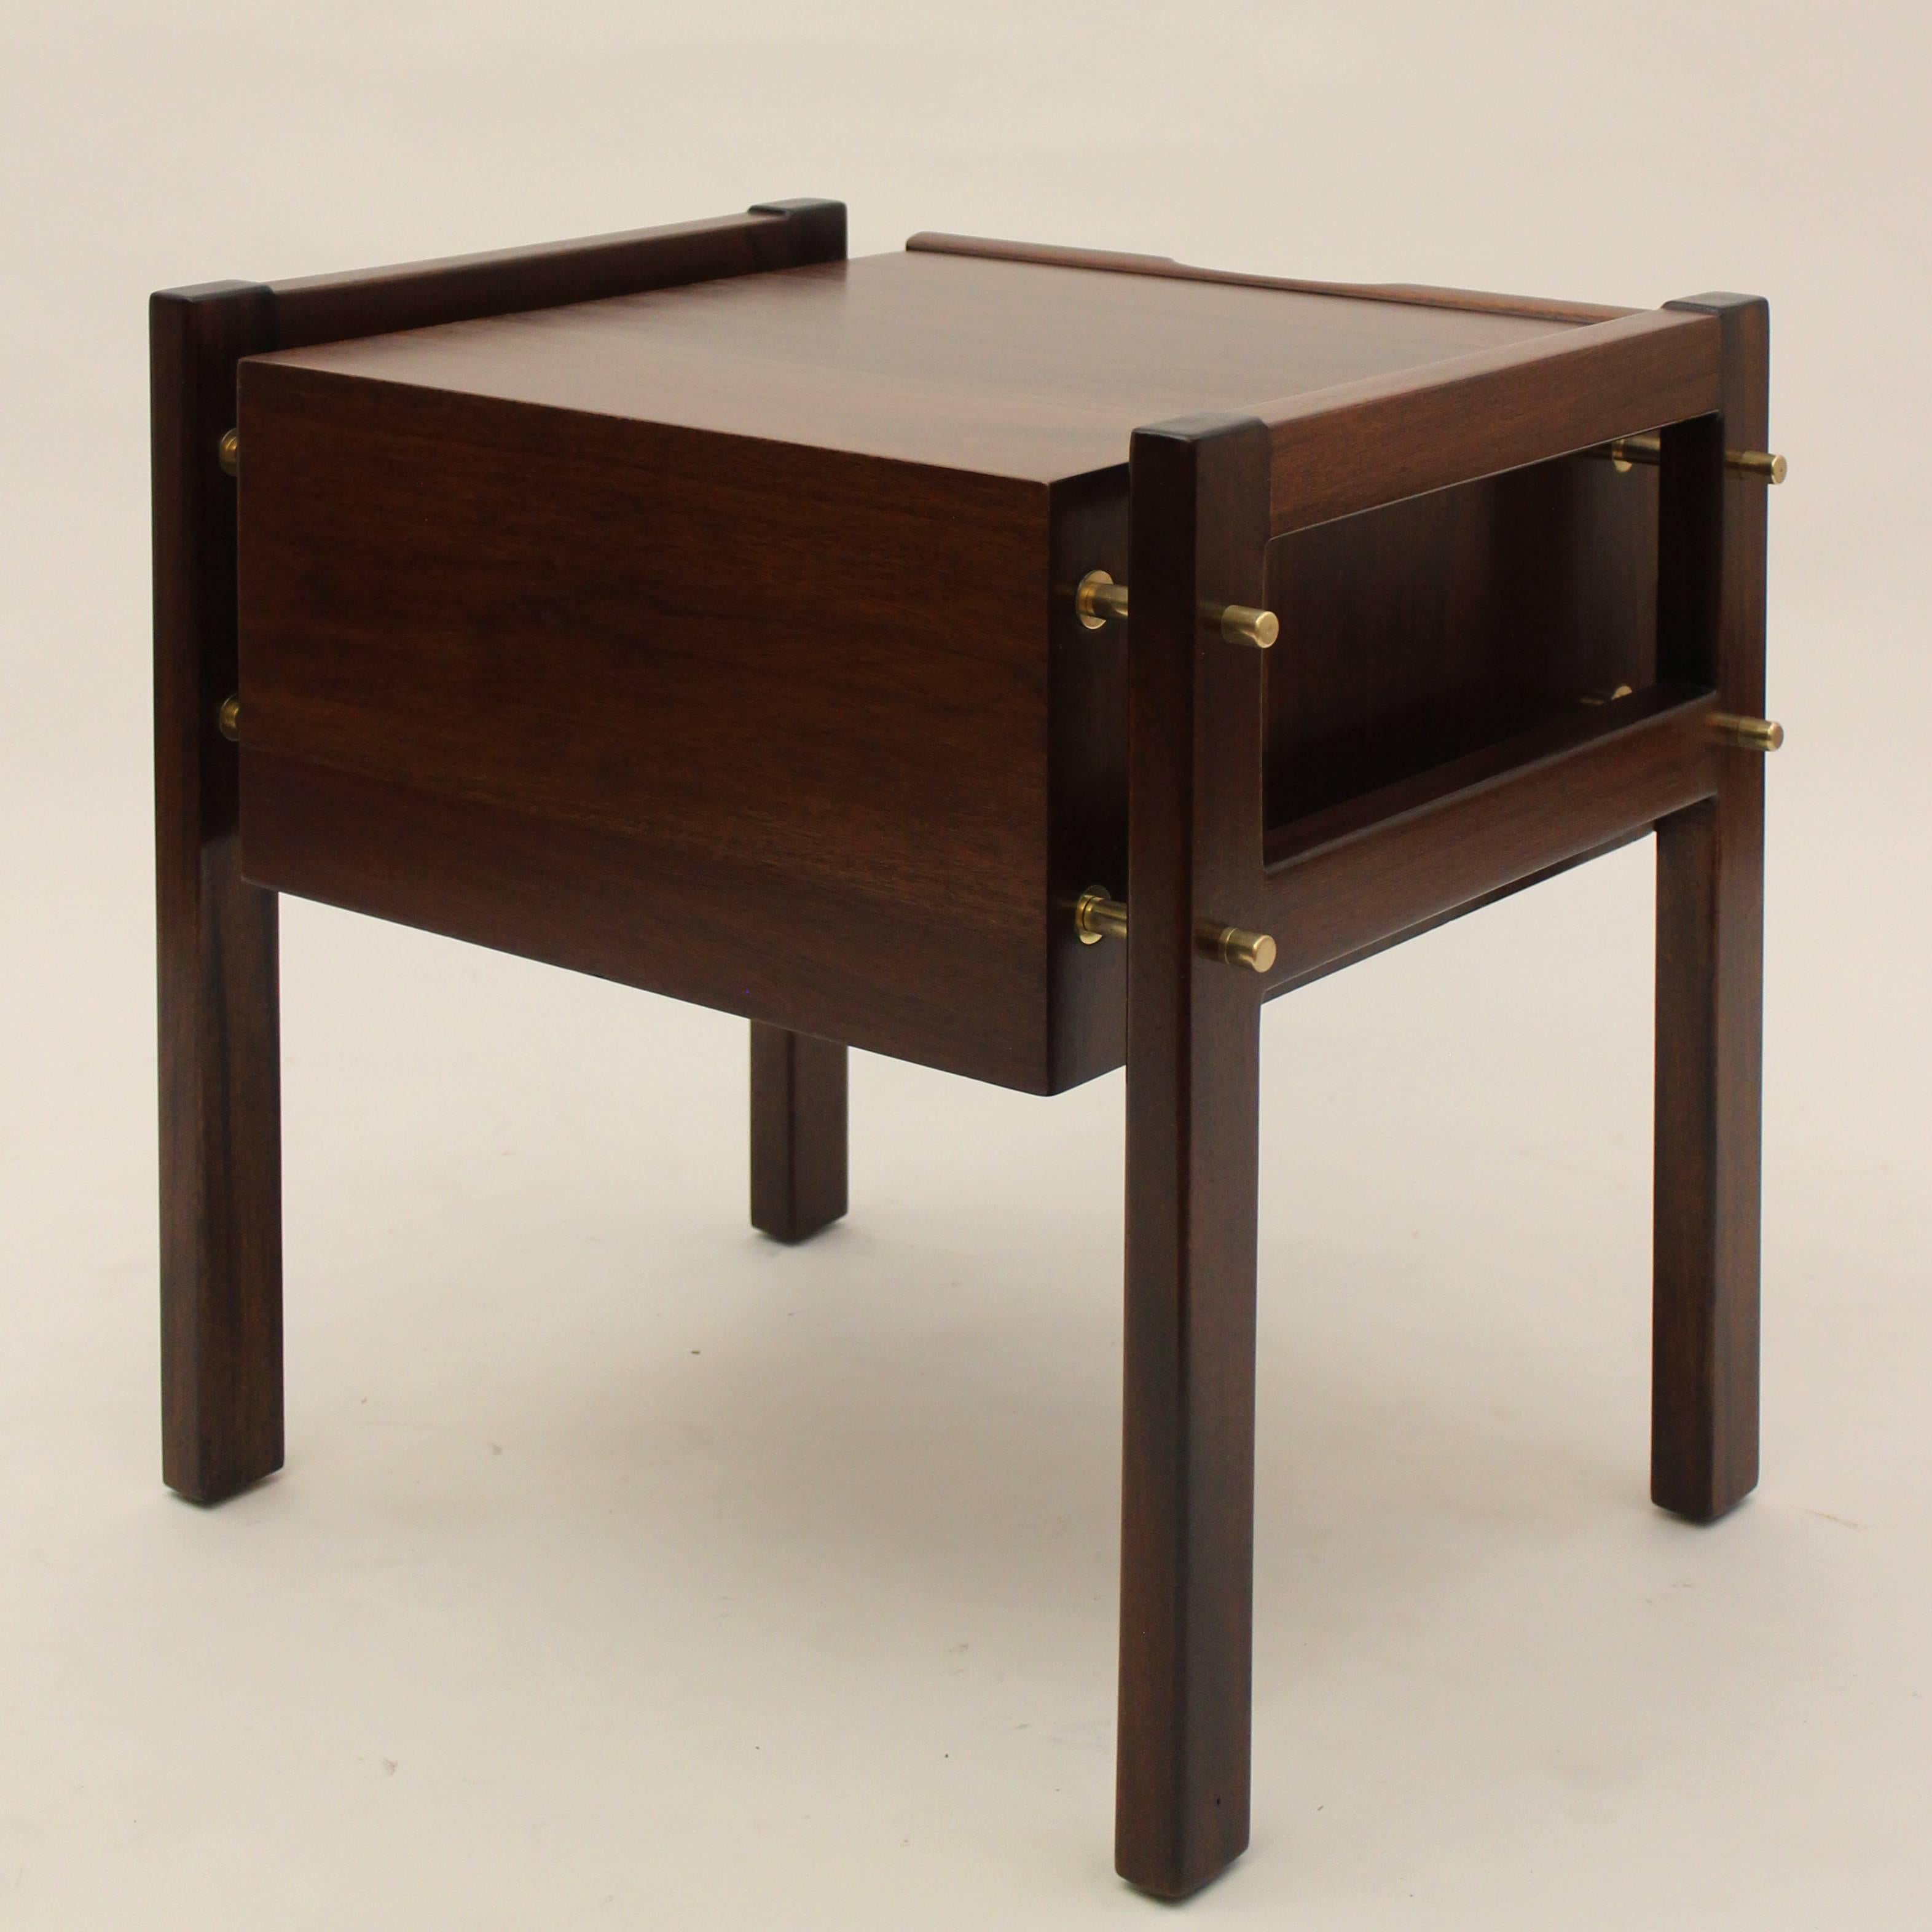 Dyed Pair of Mid-Century Edmund Spence Nightstands